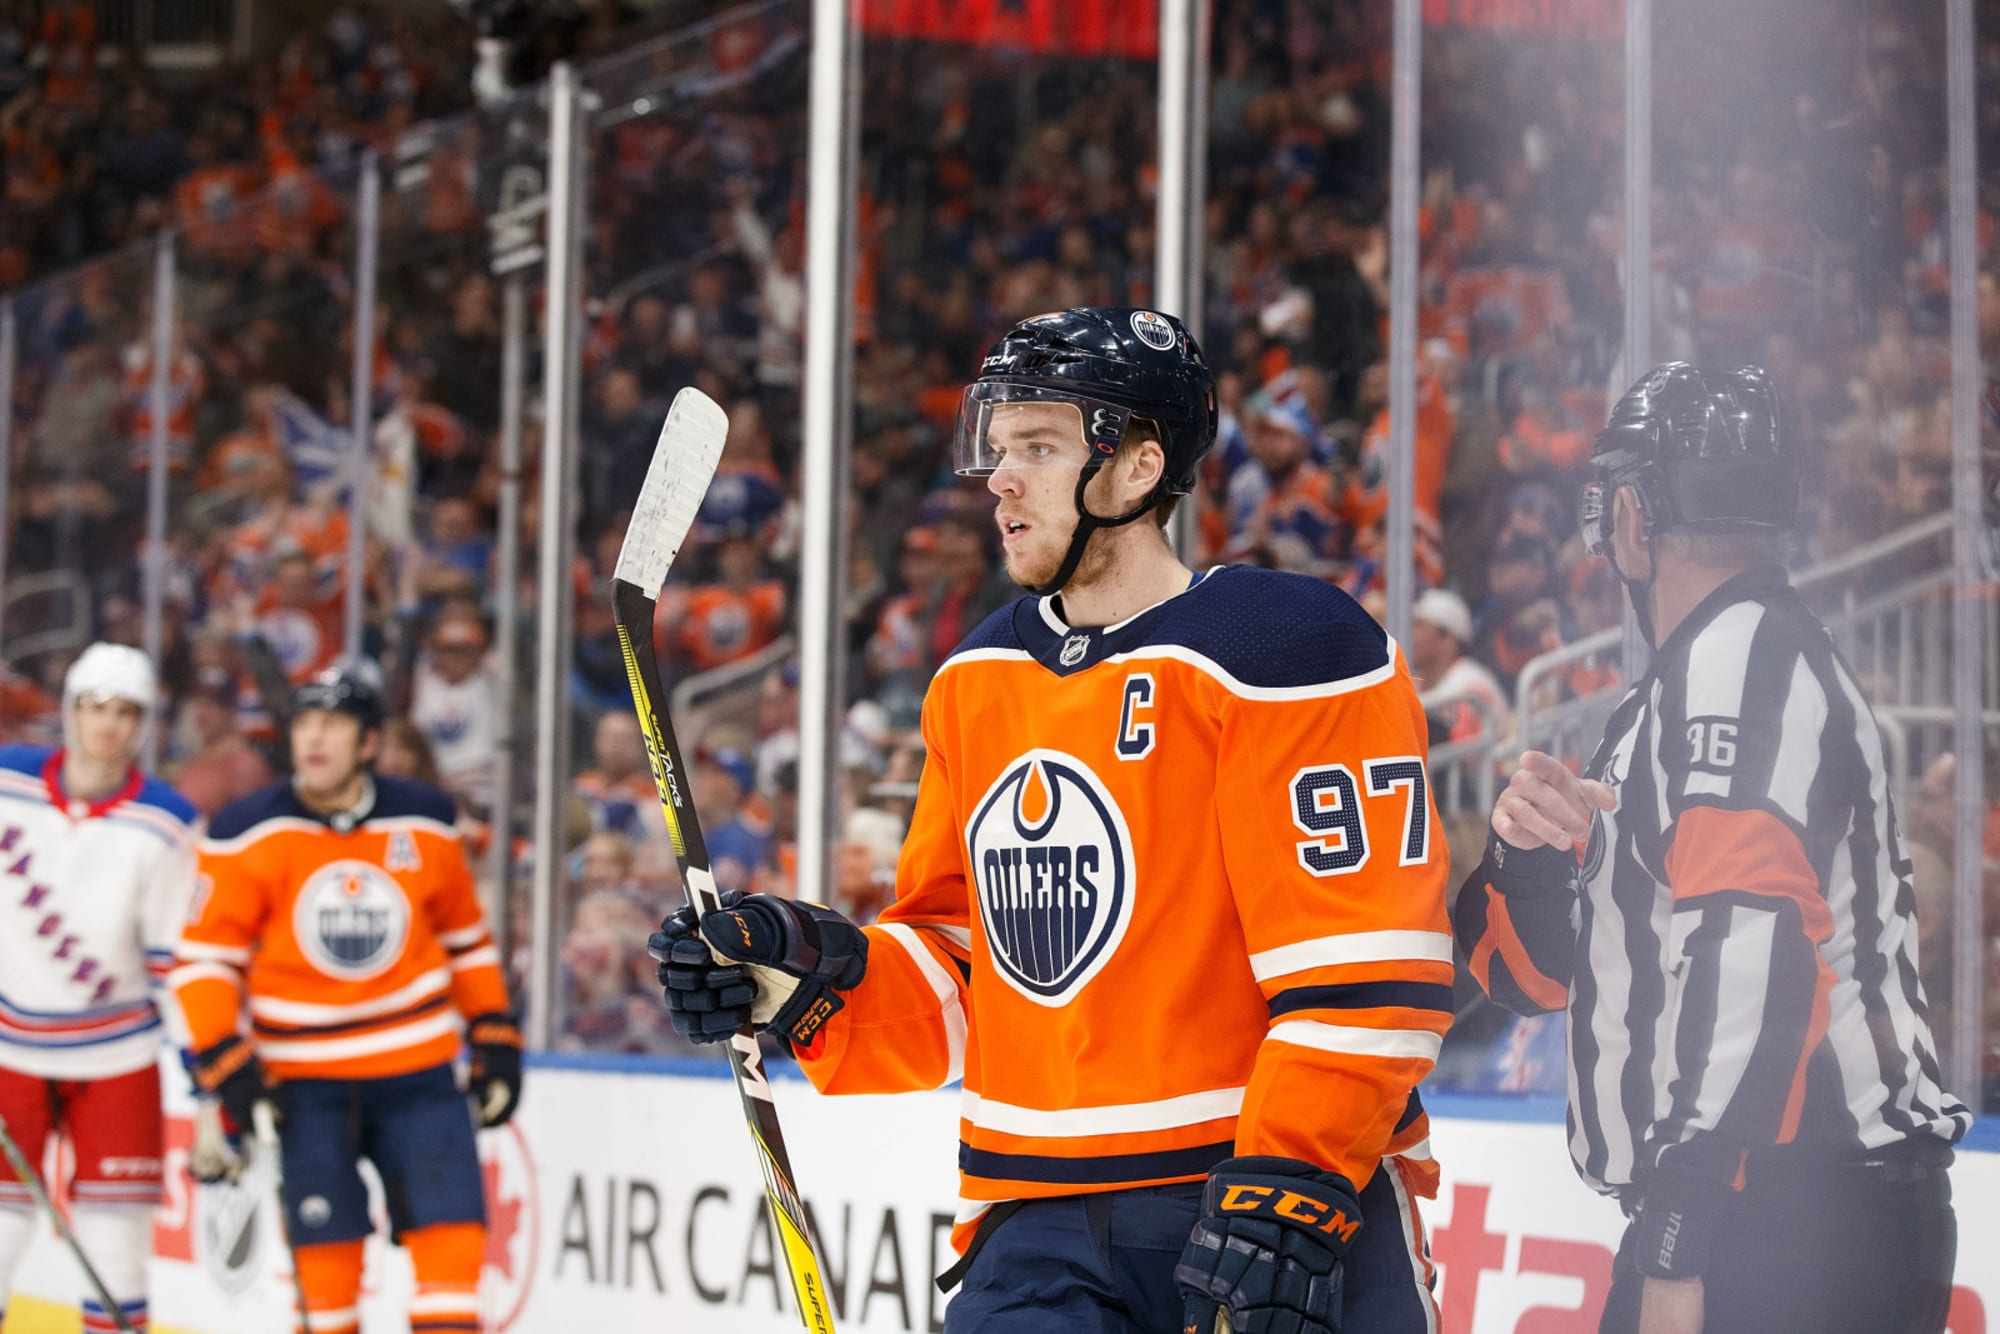 Edmonton Oilers debut new white jersey at Connor McDavid signing